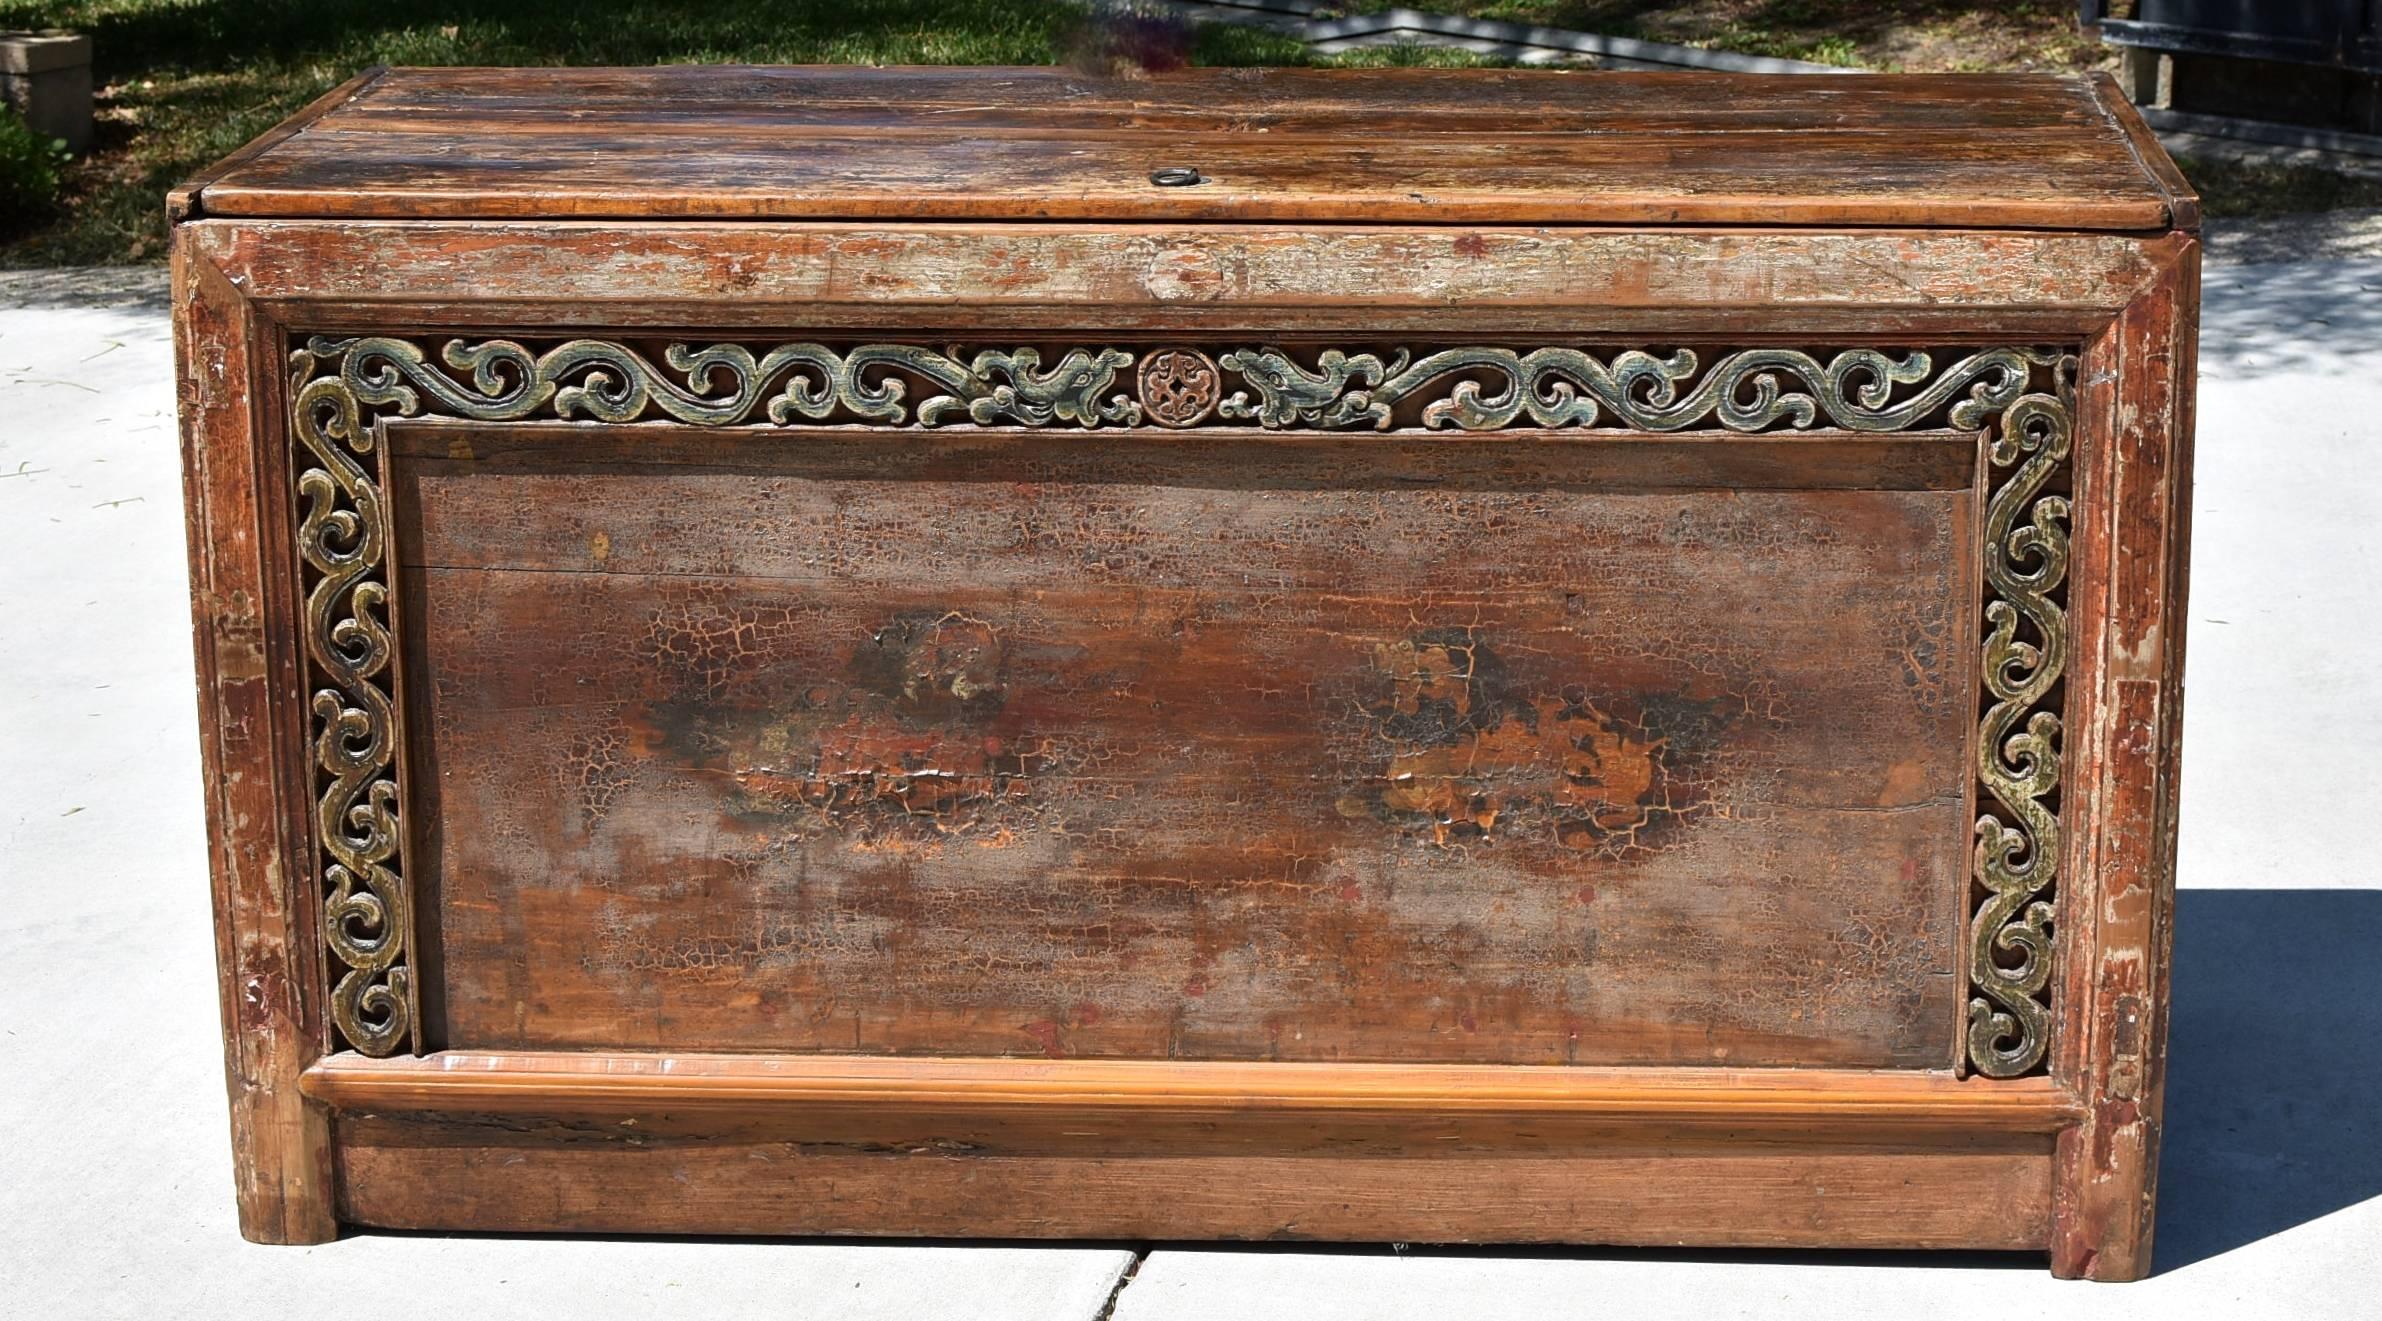 Beautiful Mongolian chest with two playful foo dogs. This is an all original, 19th century piece whose patina is well preserved. The crackled the finish is stable and enhances the charm of the chest. Beautiful, original colors include aquamarine